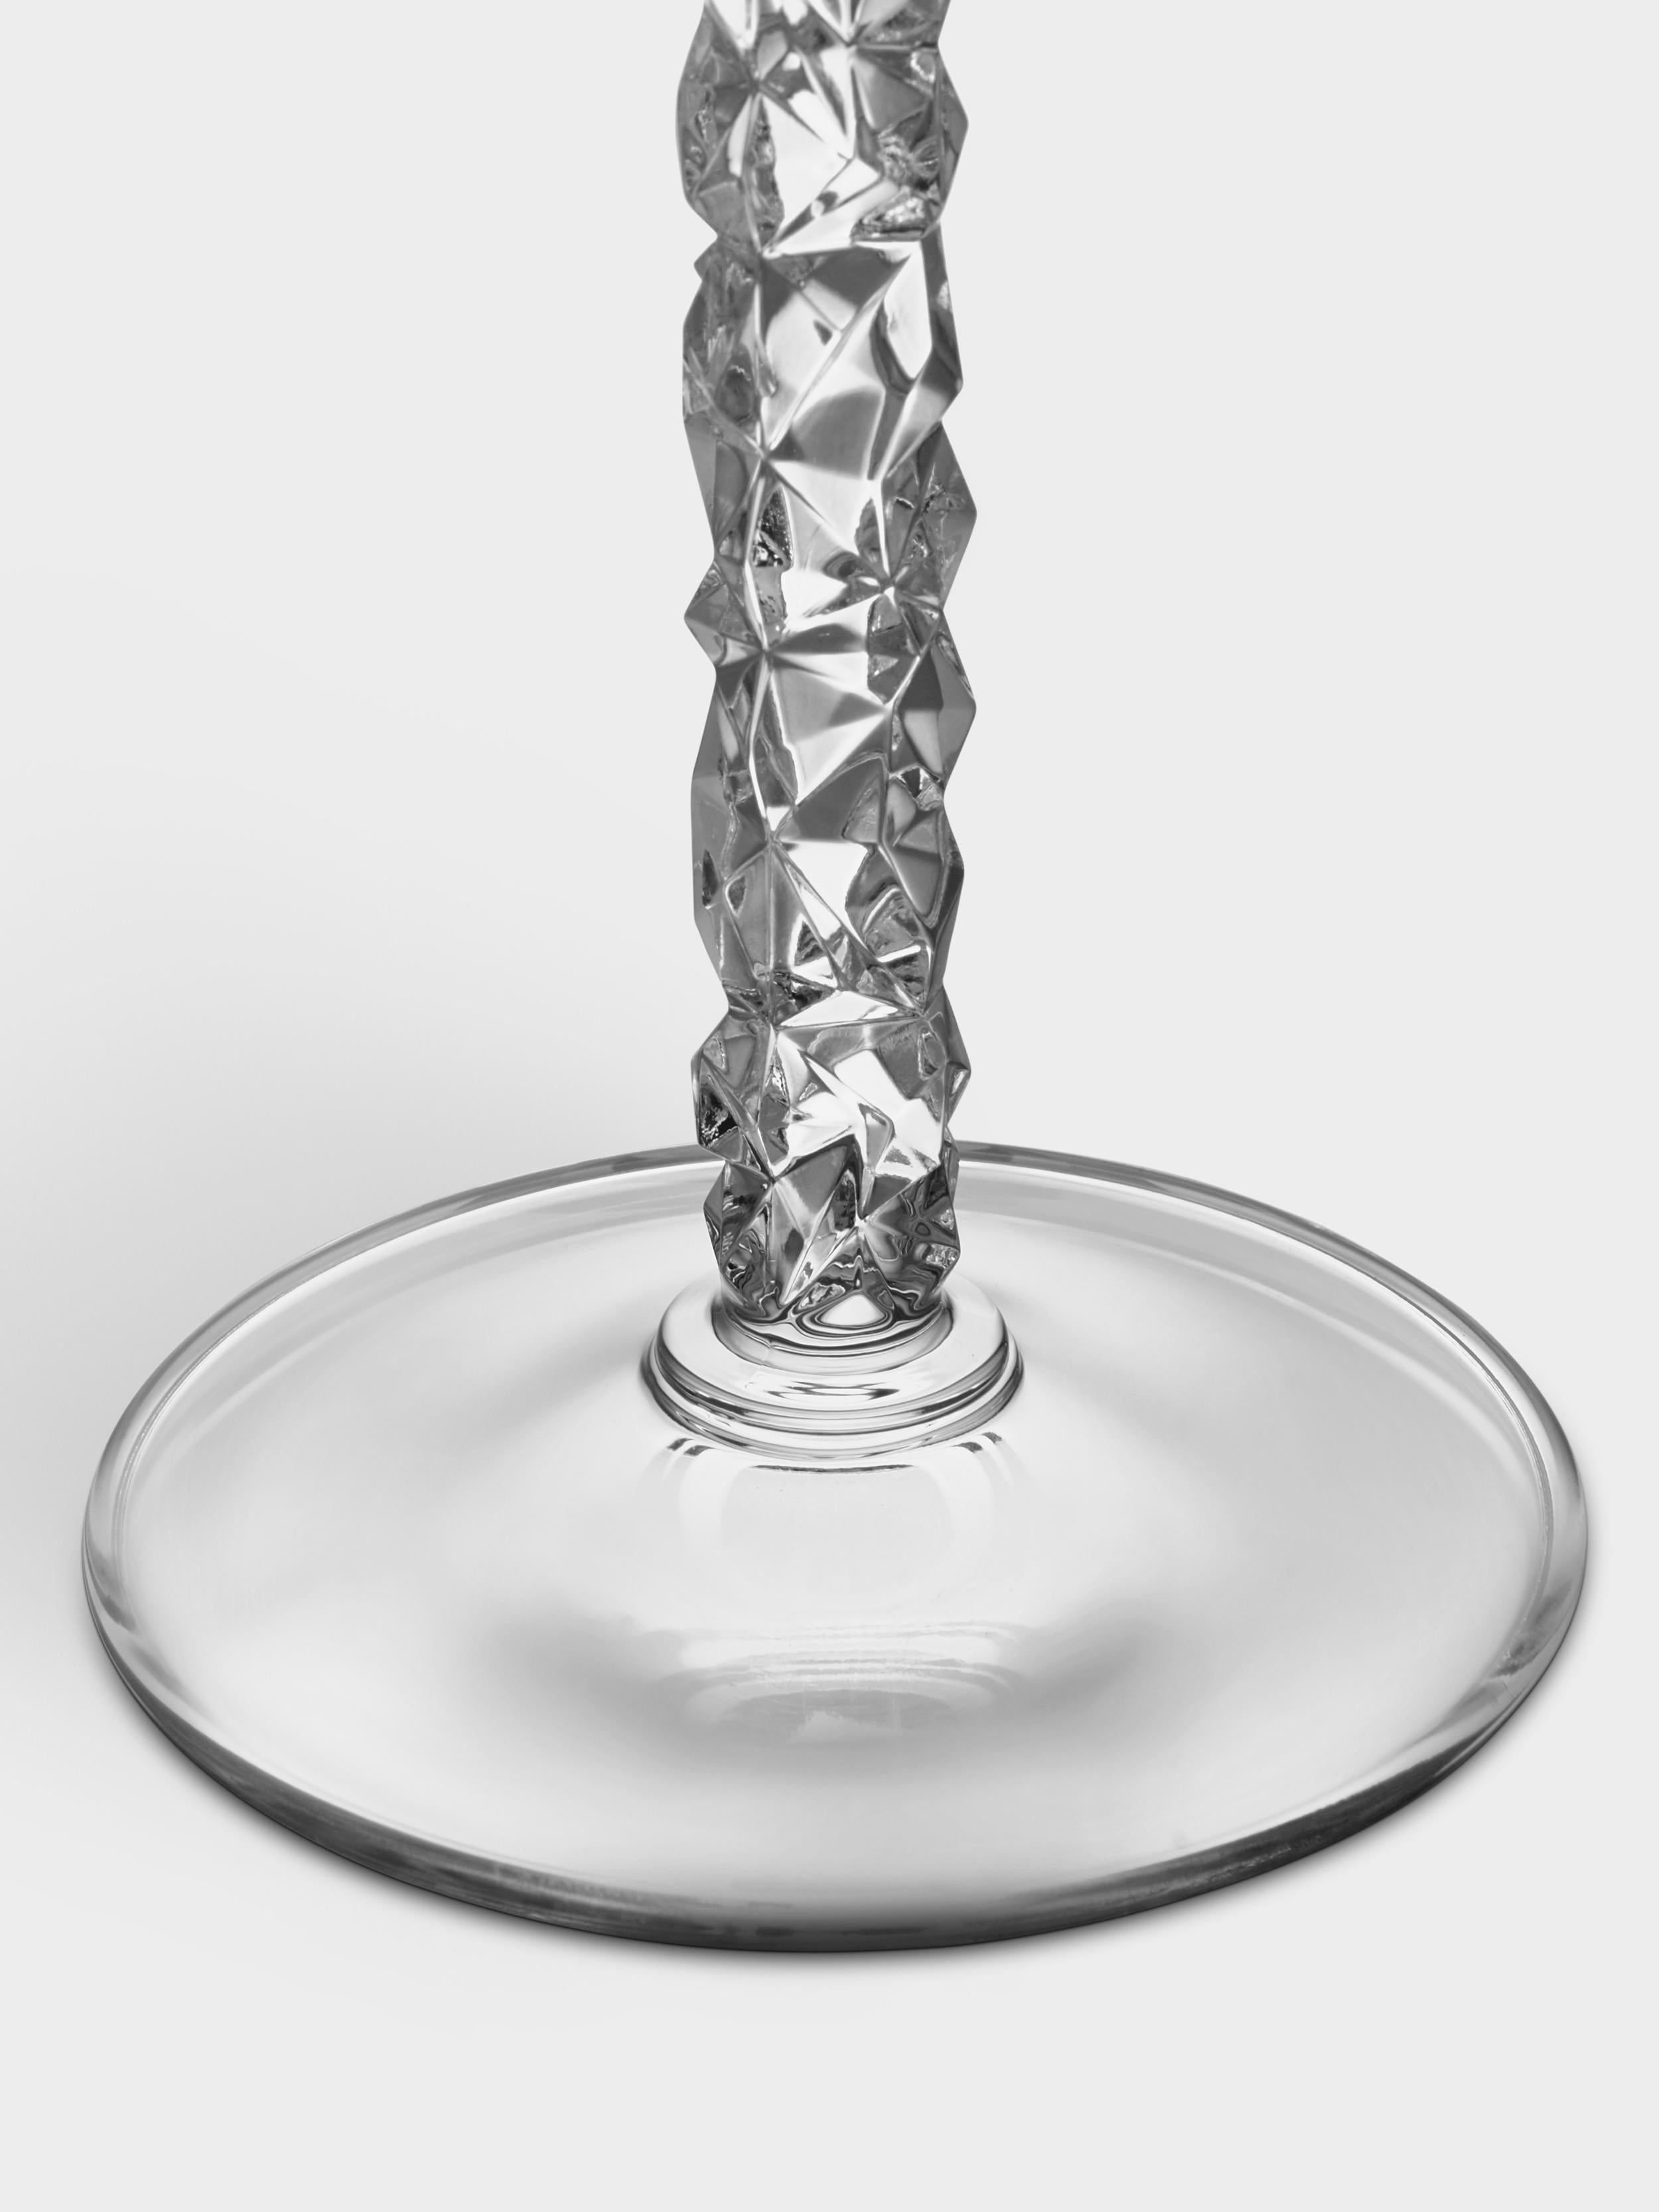 The Carat collection is based on a contemporary interpretation of the traditional cut glass for which Orrefors is world-renowned. Carat Wine has a stem covered with the collection’s characteristic asymmetrical motif, which produces beautiful